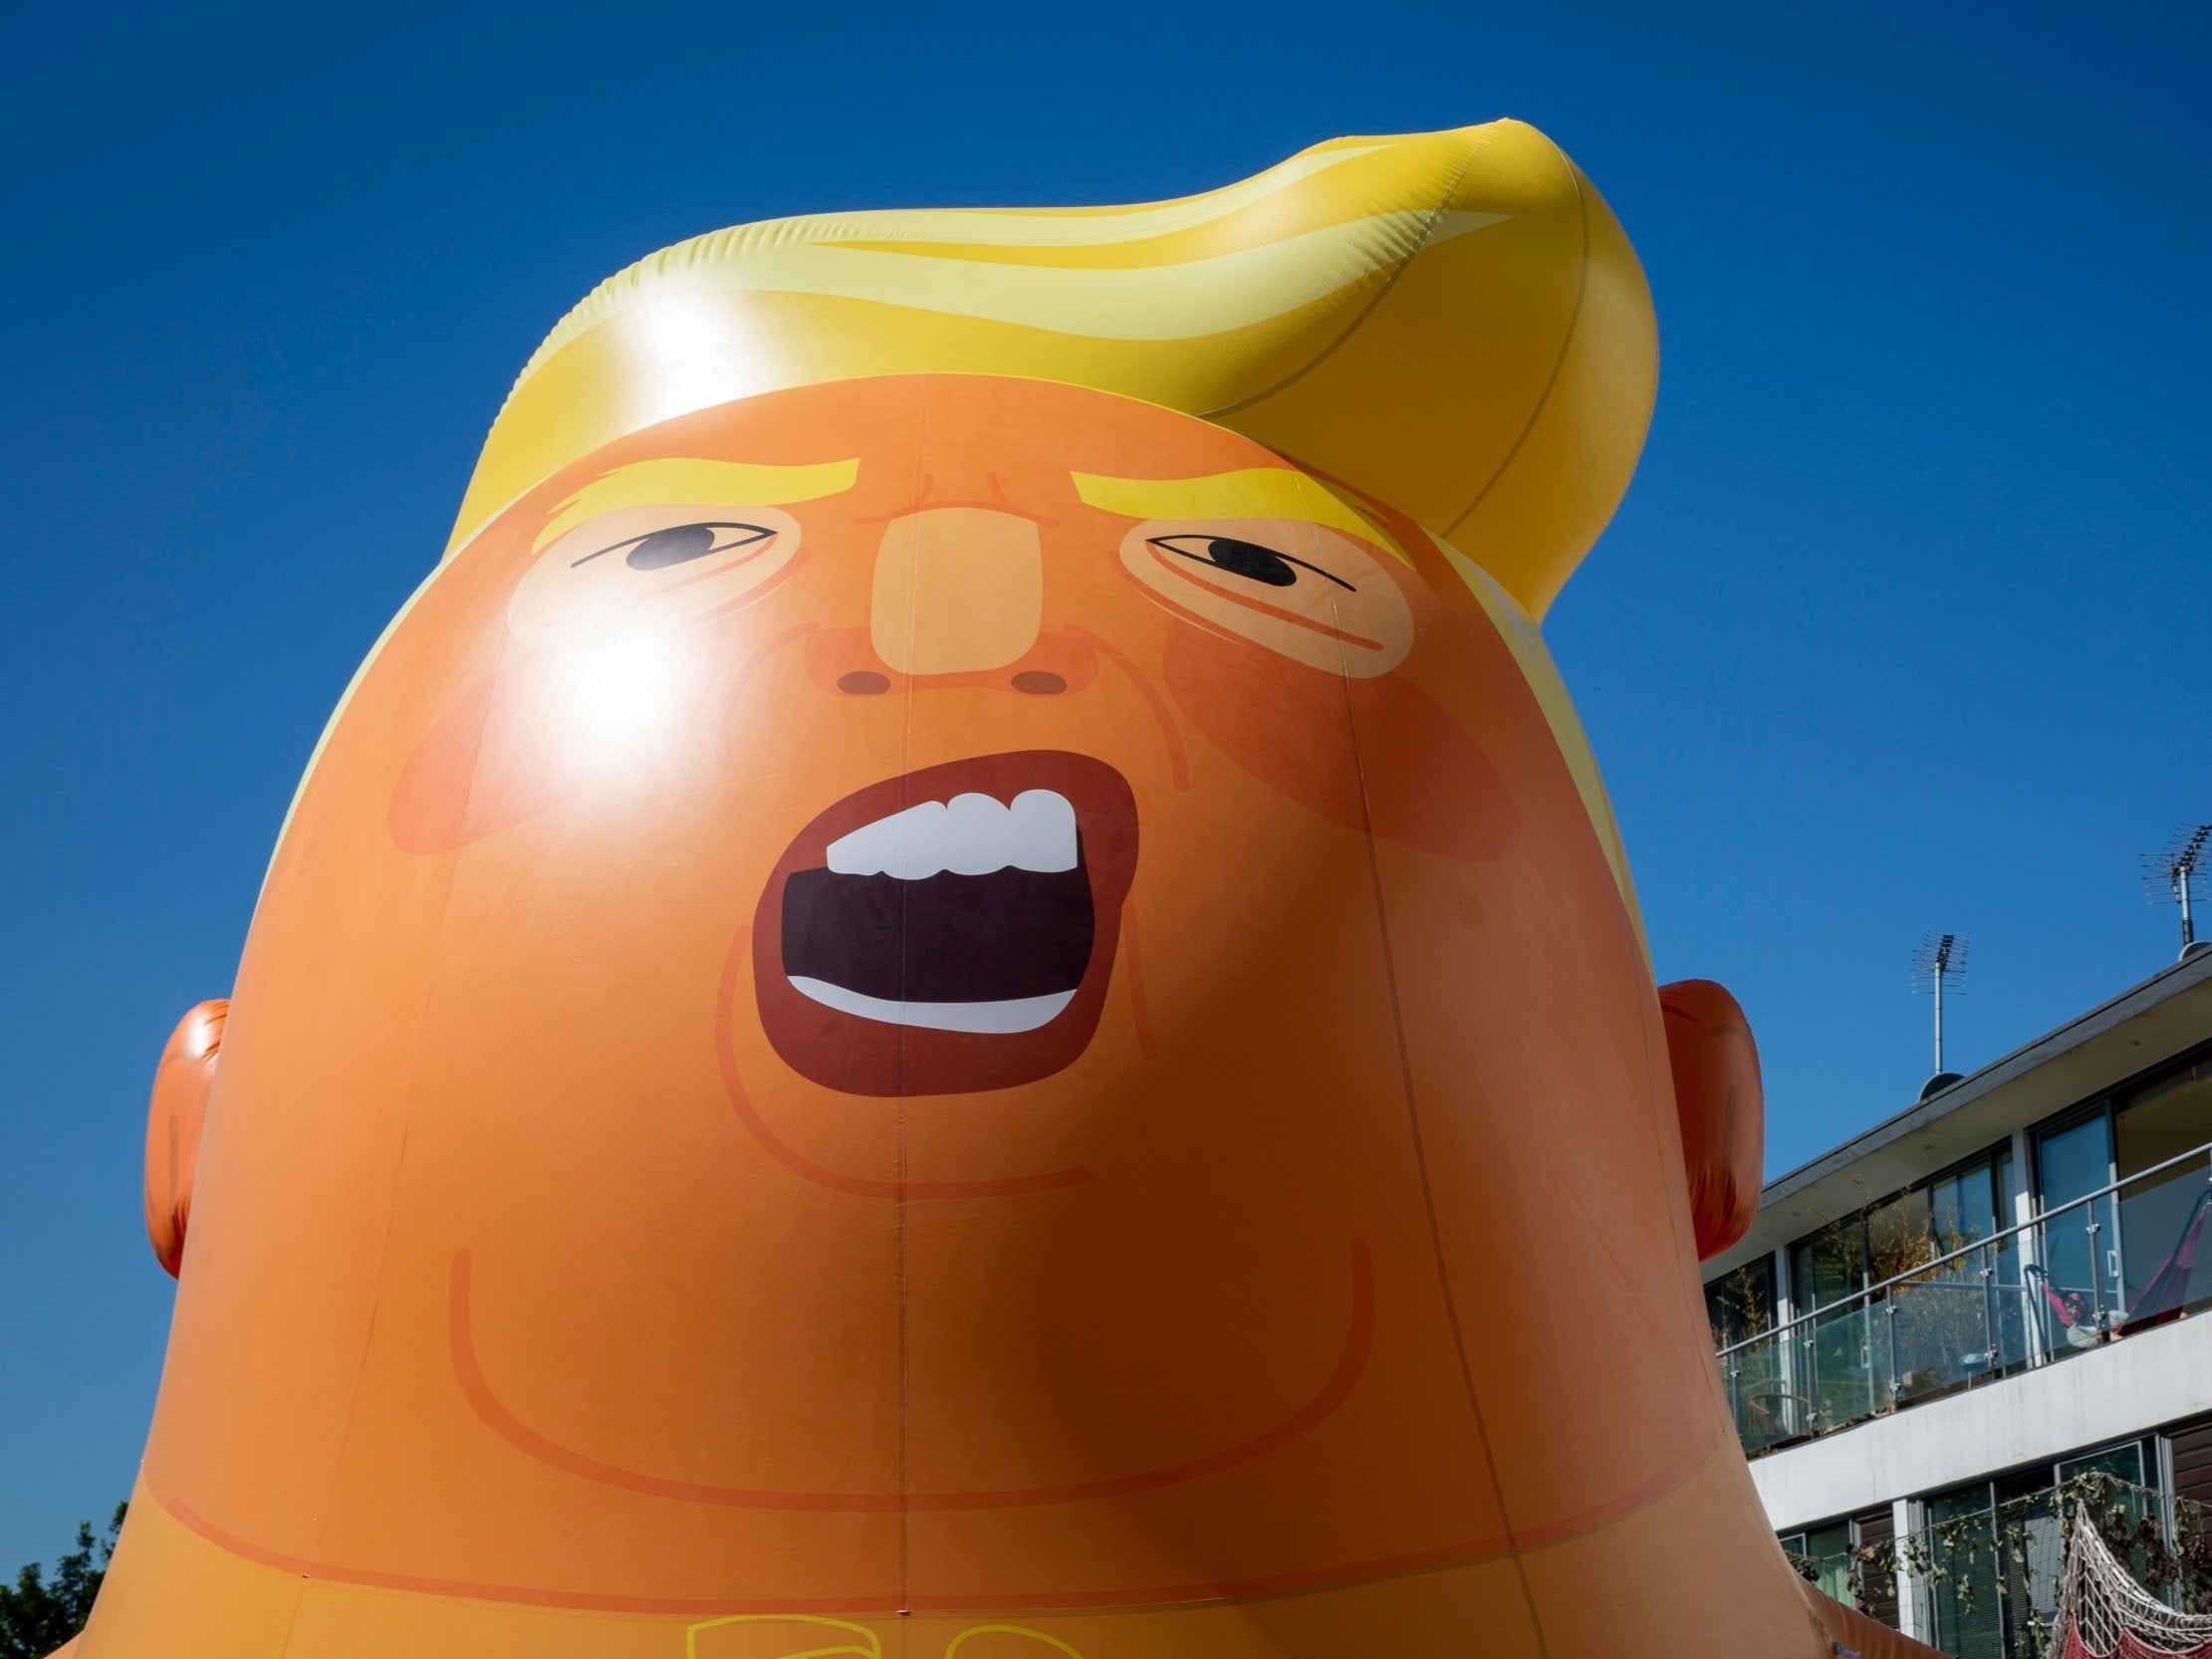 A Trump baby balloon is fun, but beneath the indignation lies something which feels more like self-righteous mocking